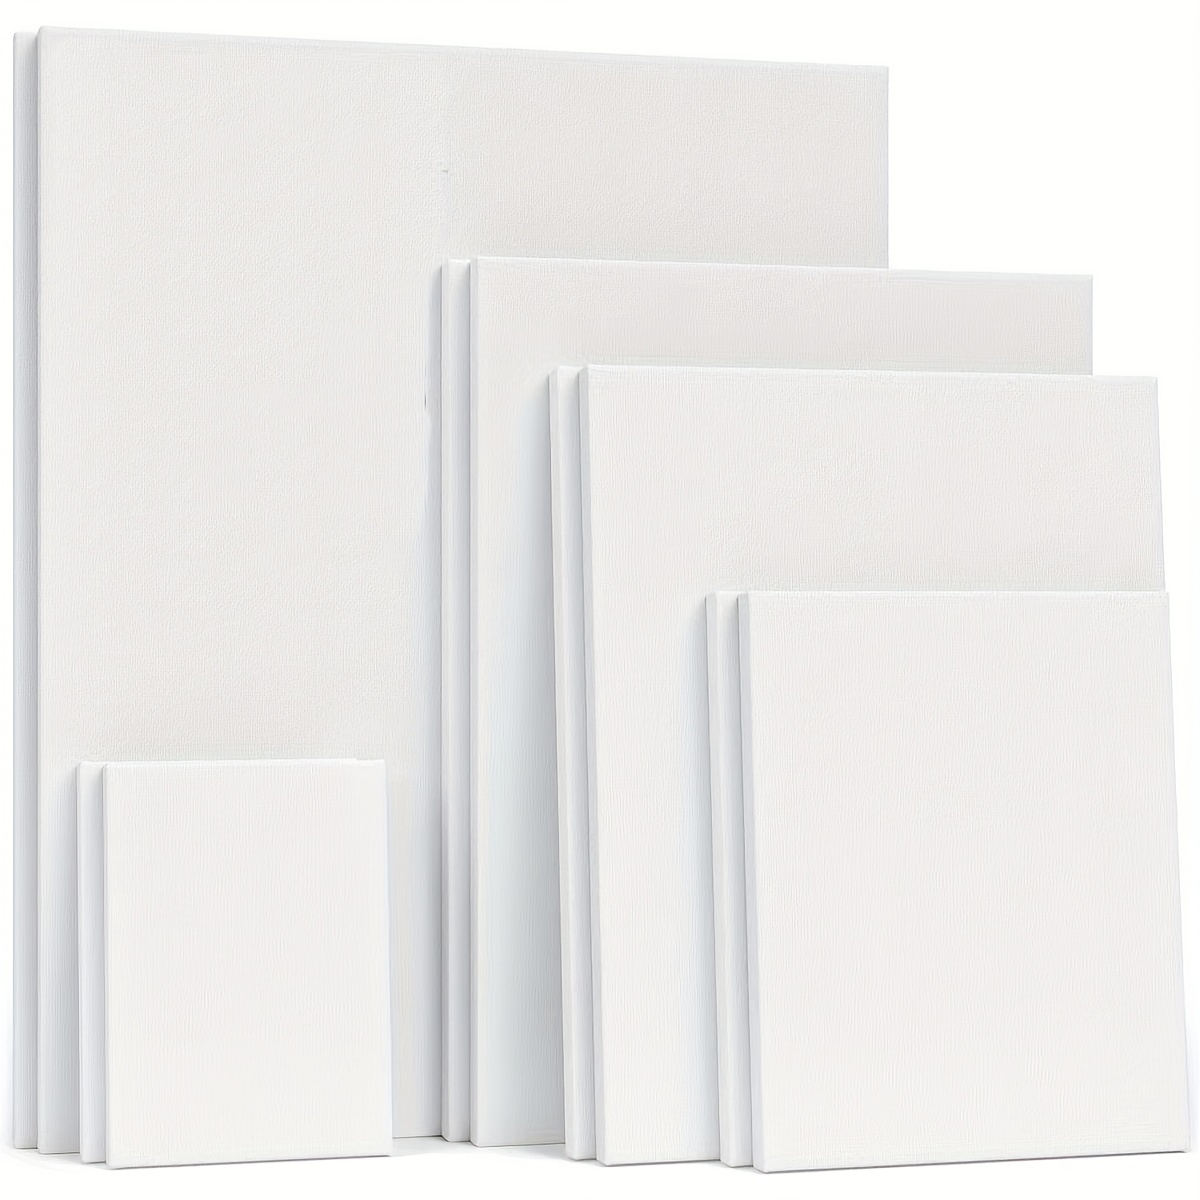 PHOENIX Professional Stretched Canvas for Painting - 11x14 Inch/6 Pack 3/4  Inch Profile, 100% Cotton 12 Oz. Heavy Duty Gesso Triple Primed White Blank